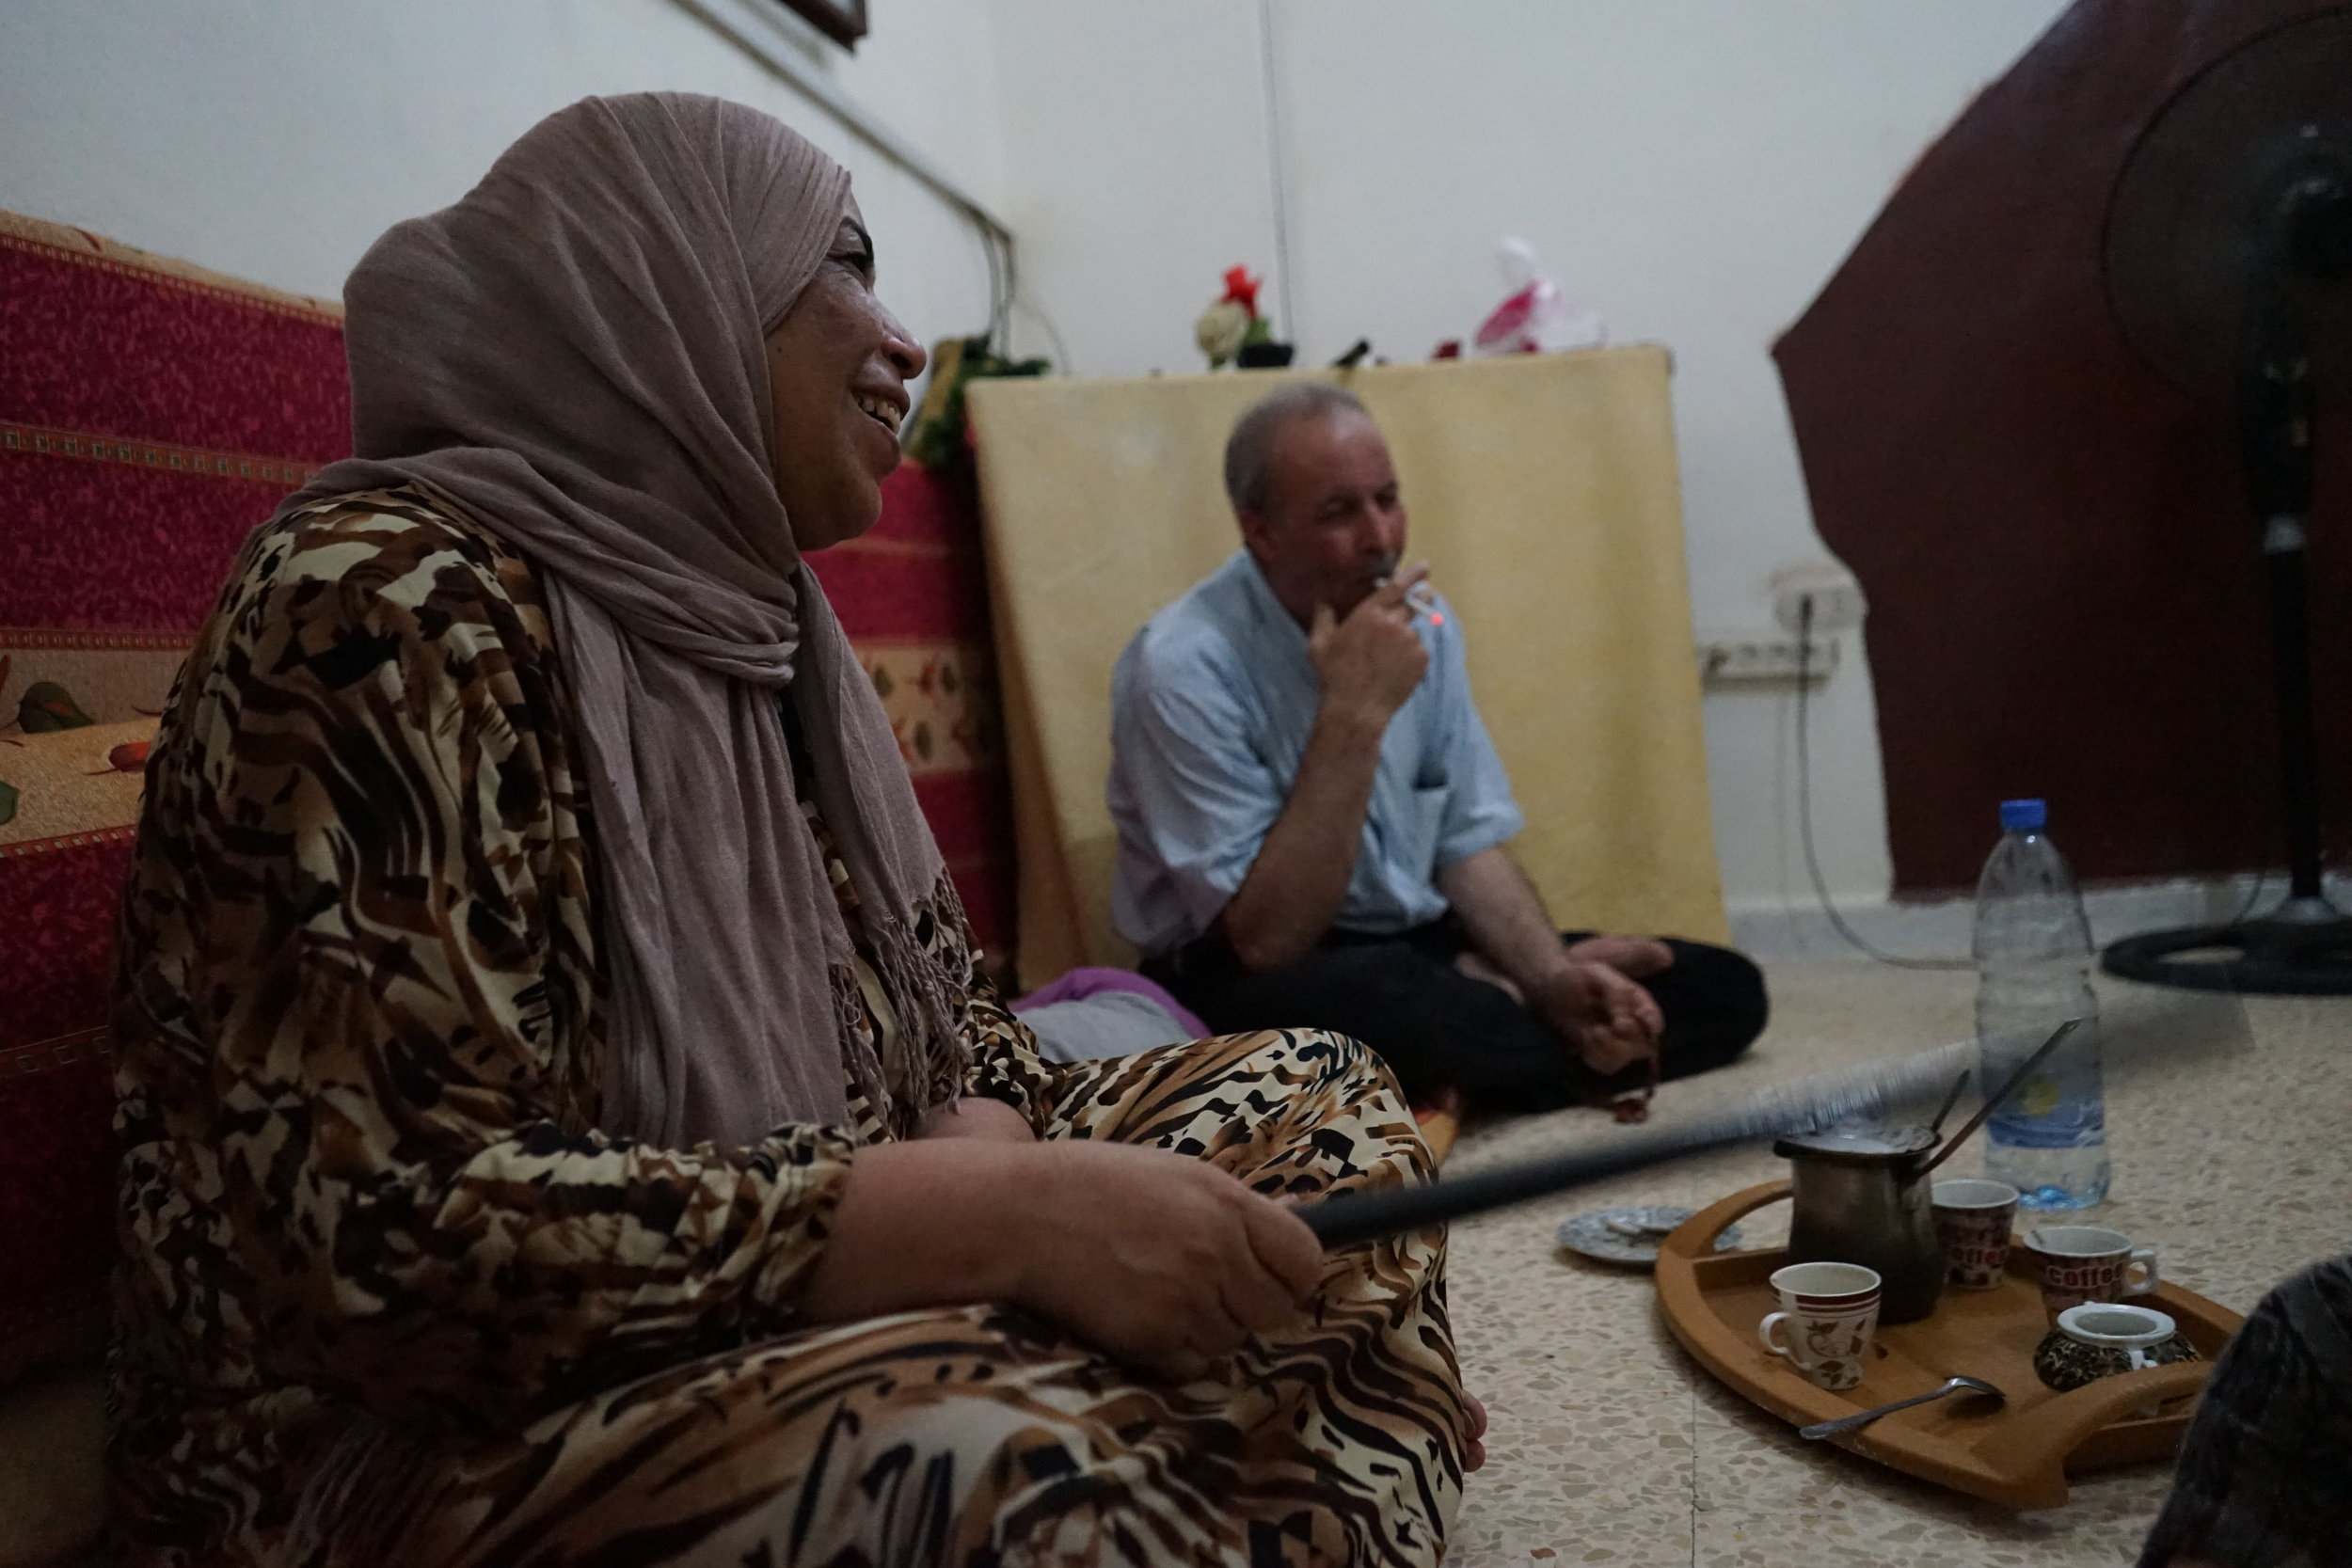  Mohamad Mohamad and his wife, Saada Mohamad, sit in their home in Sabra and Shatila on August 17, 2016. 